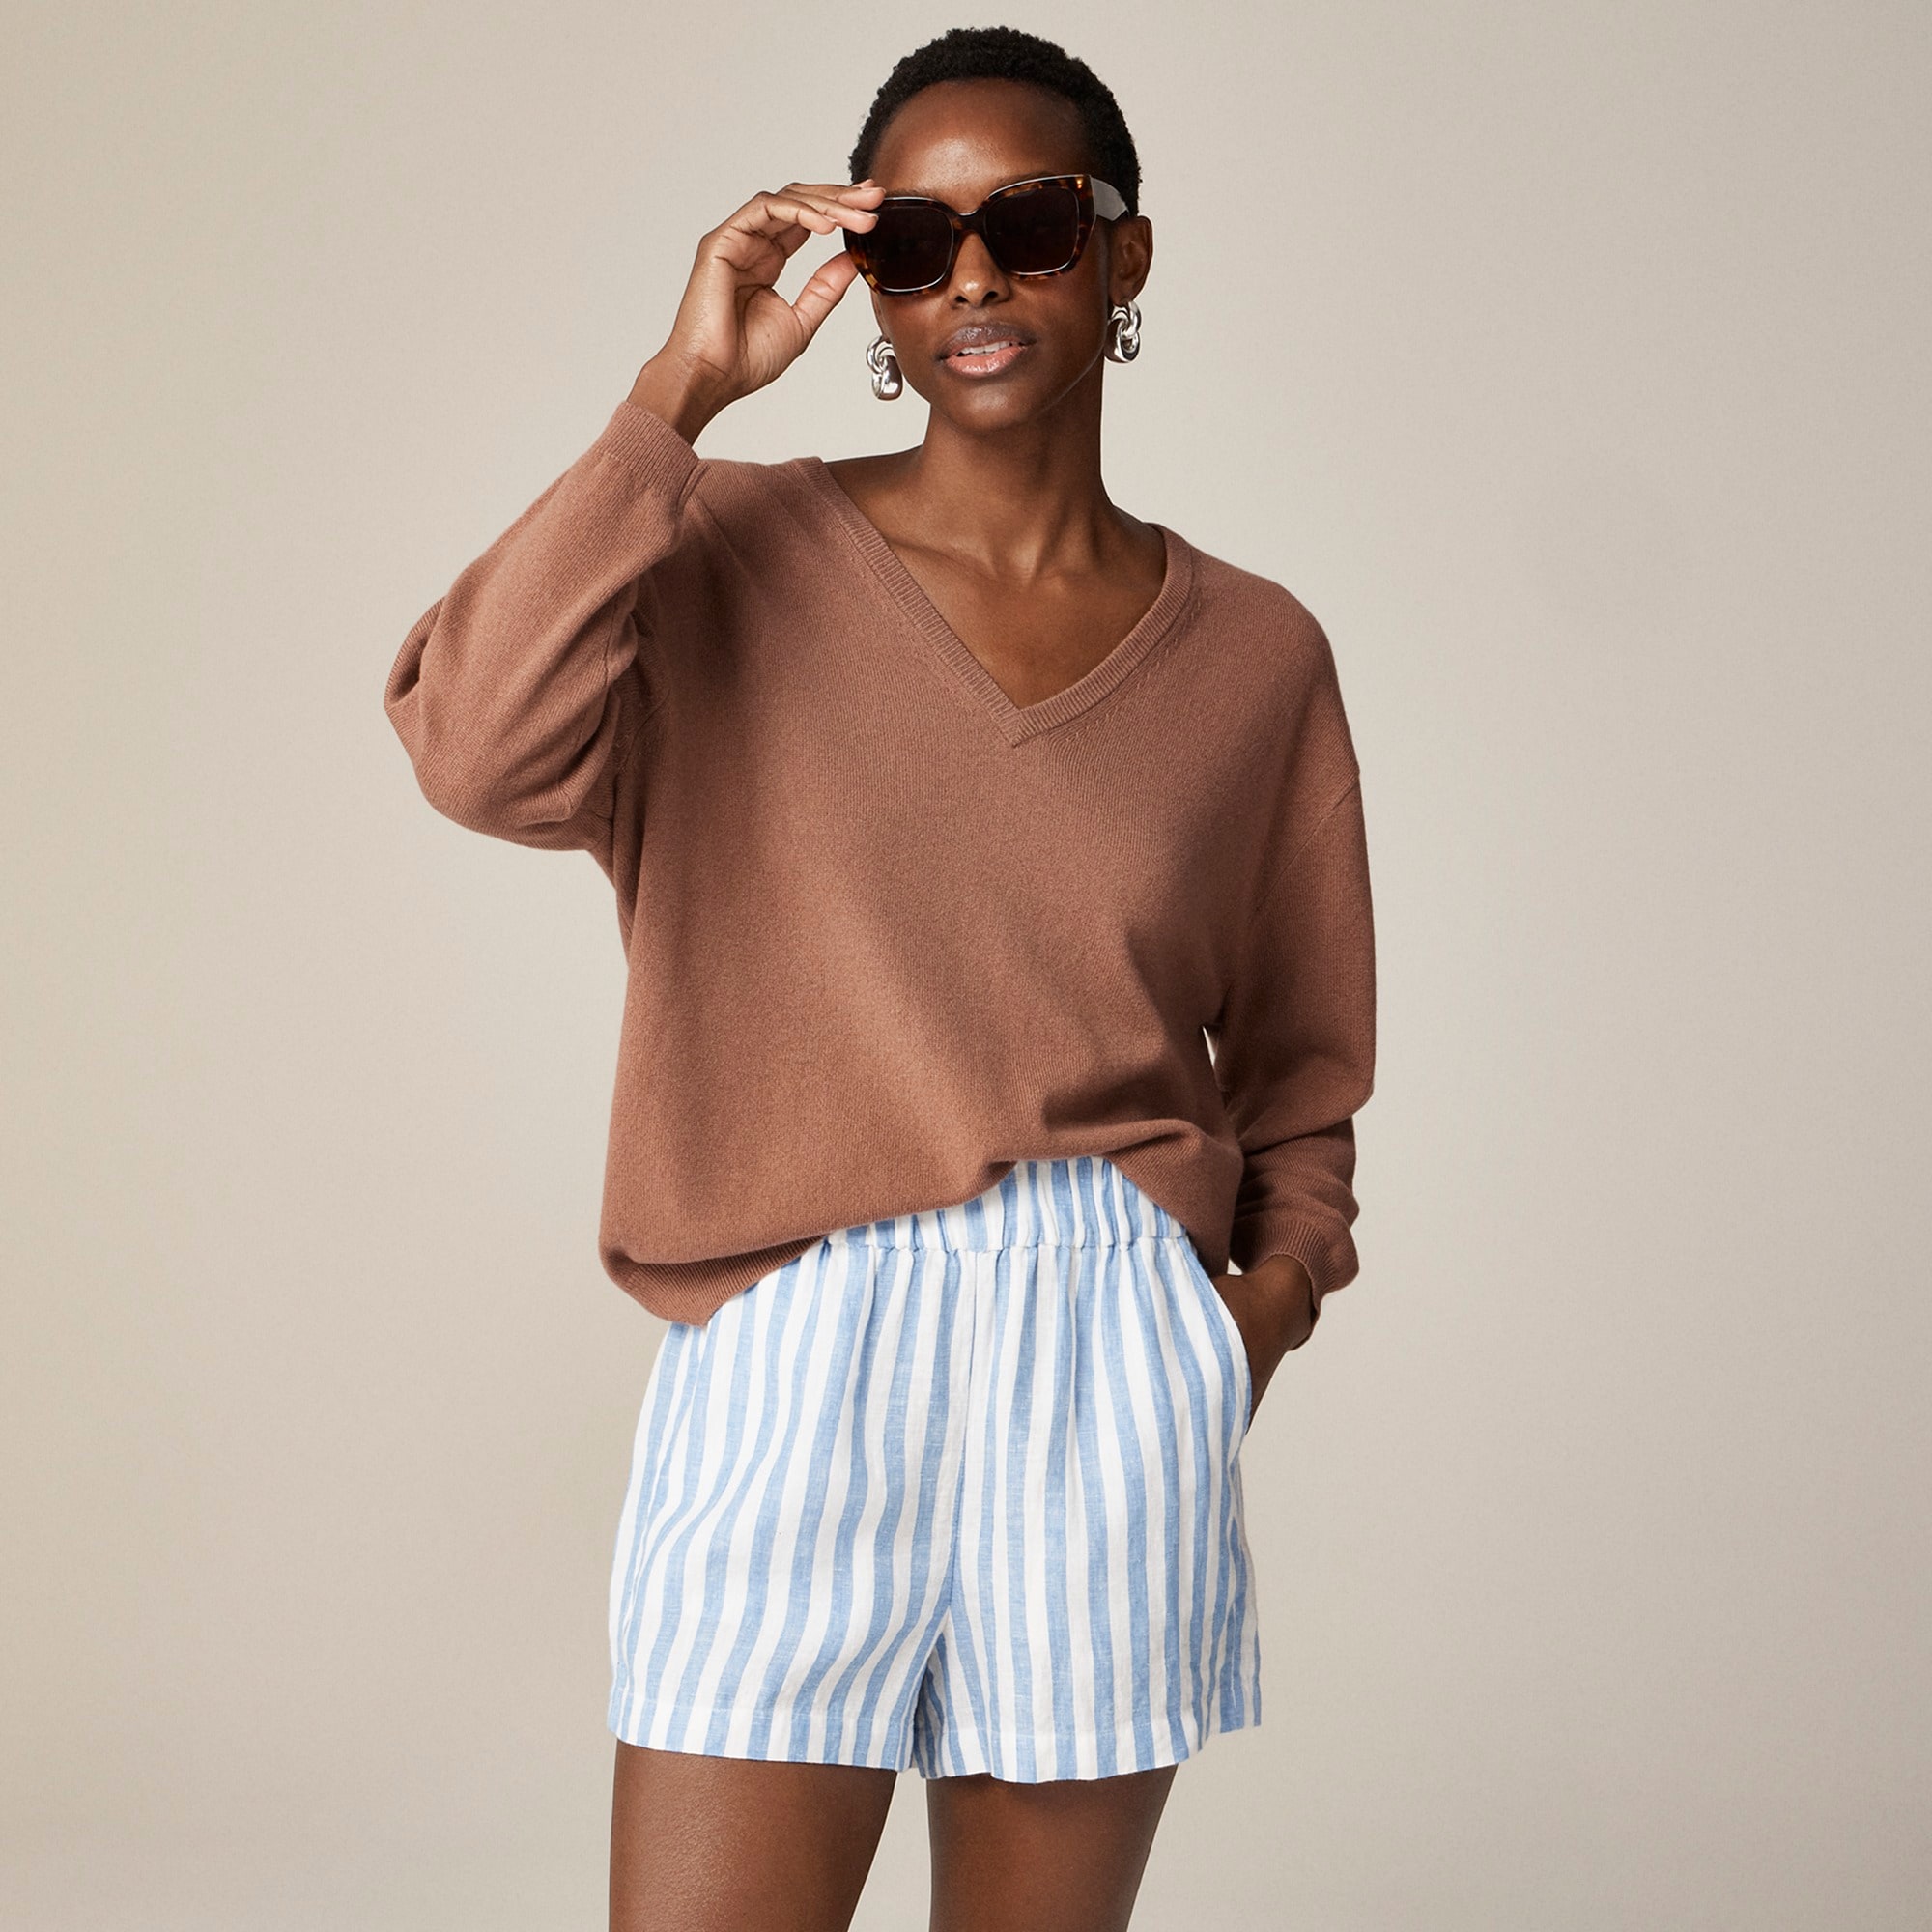 j.crew: cashmere relaxed v-neck sweater for women